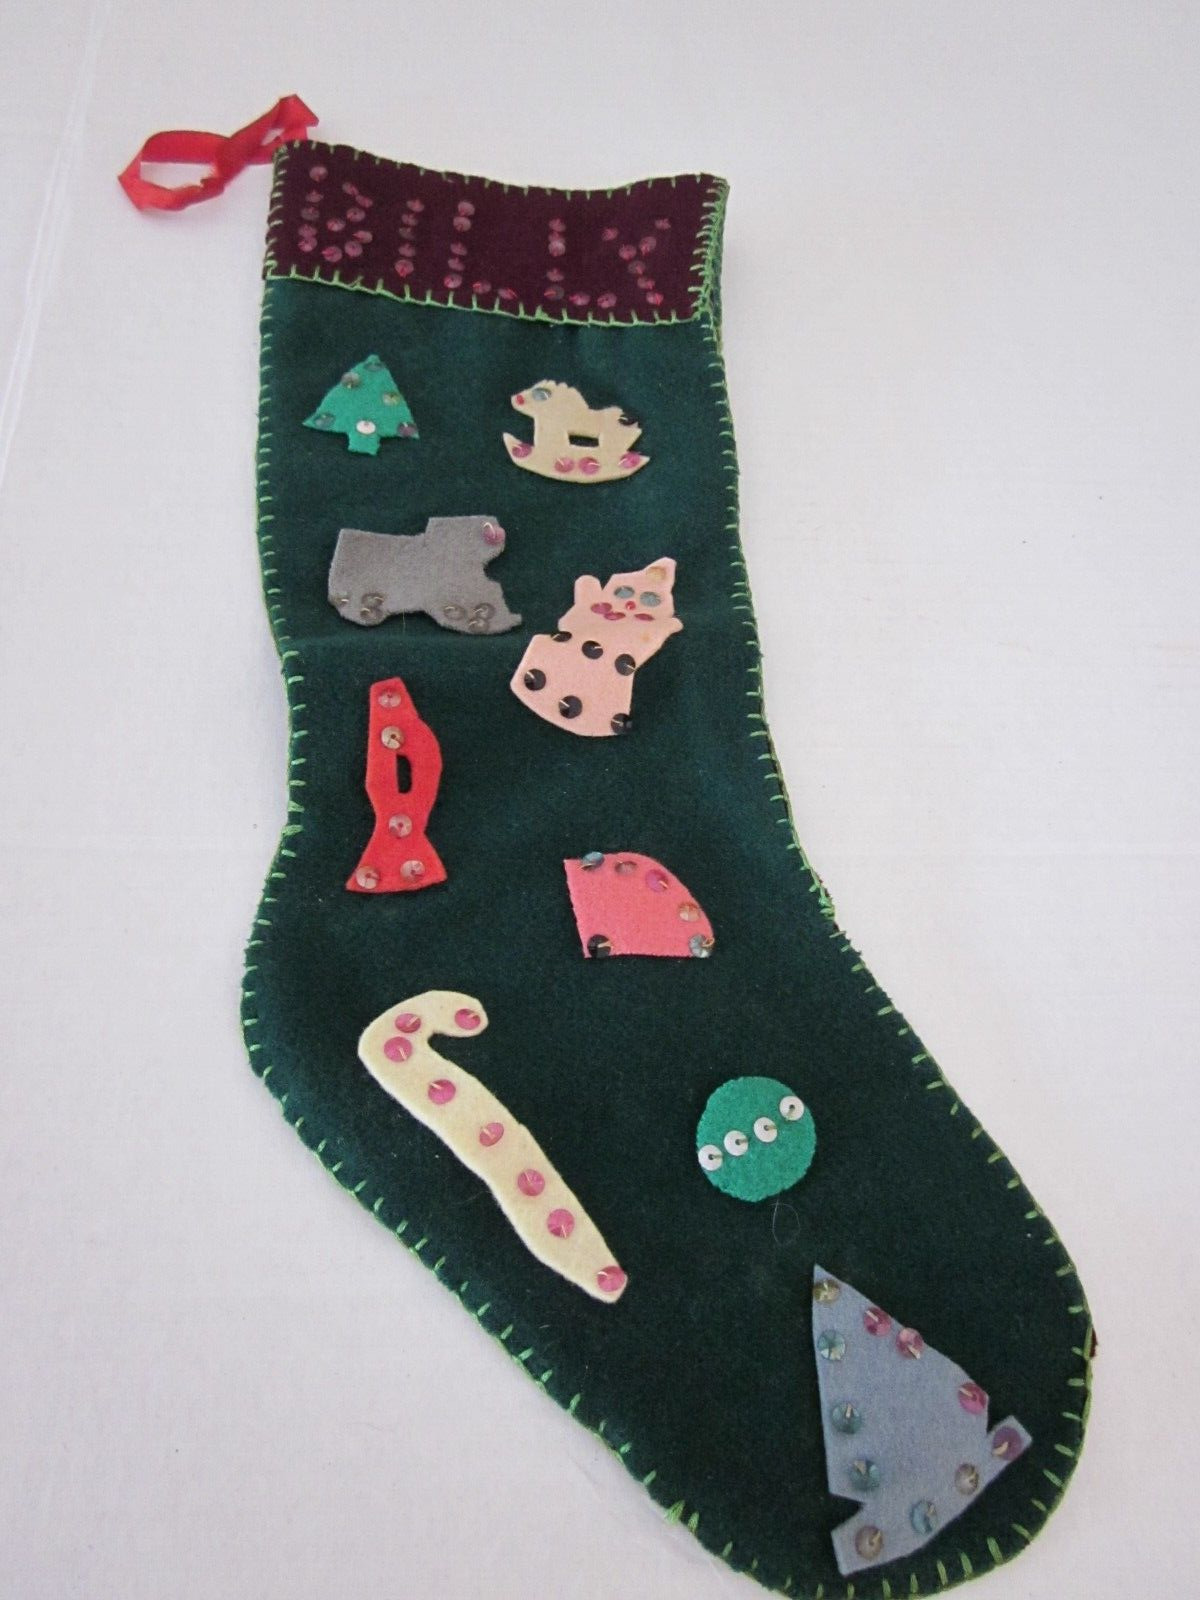 Vintage 1950’s Felt With Sequins 15” GREEN & BURGUNDY Christmas Tree Stocking